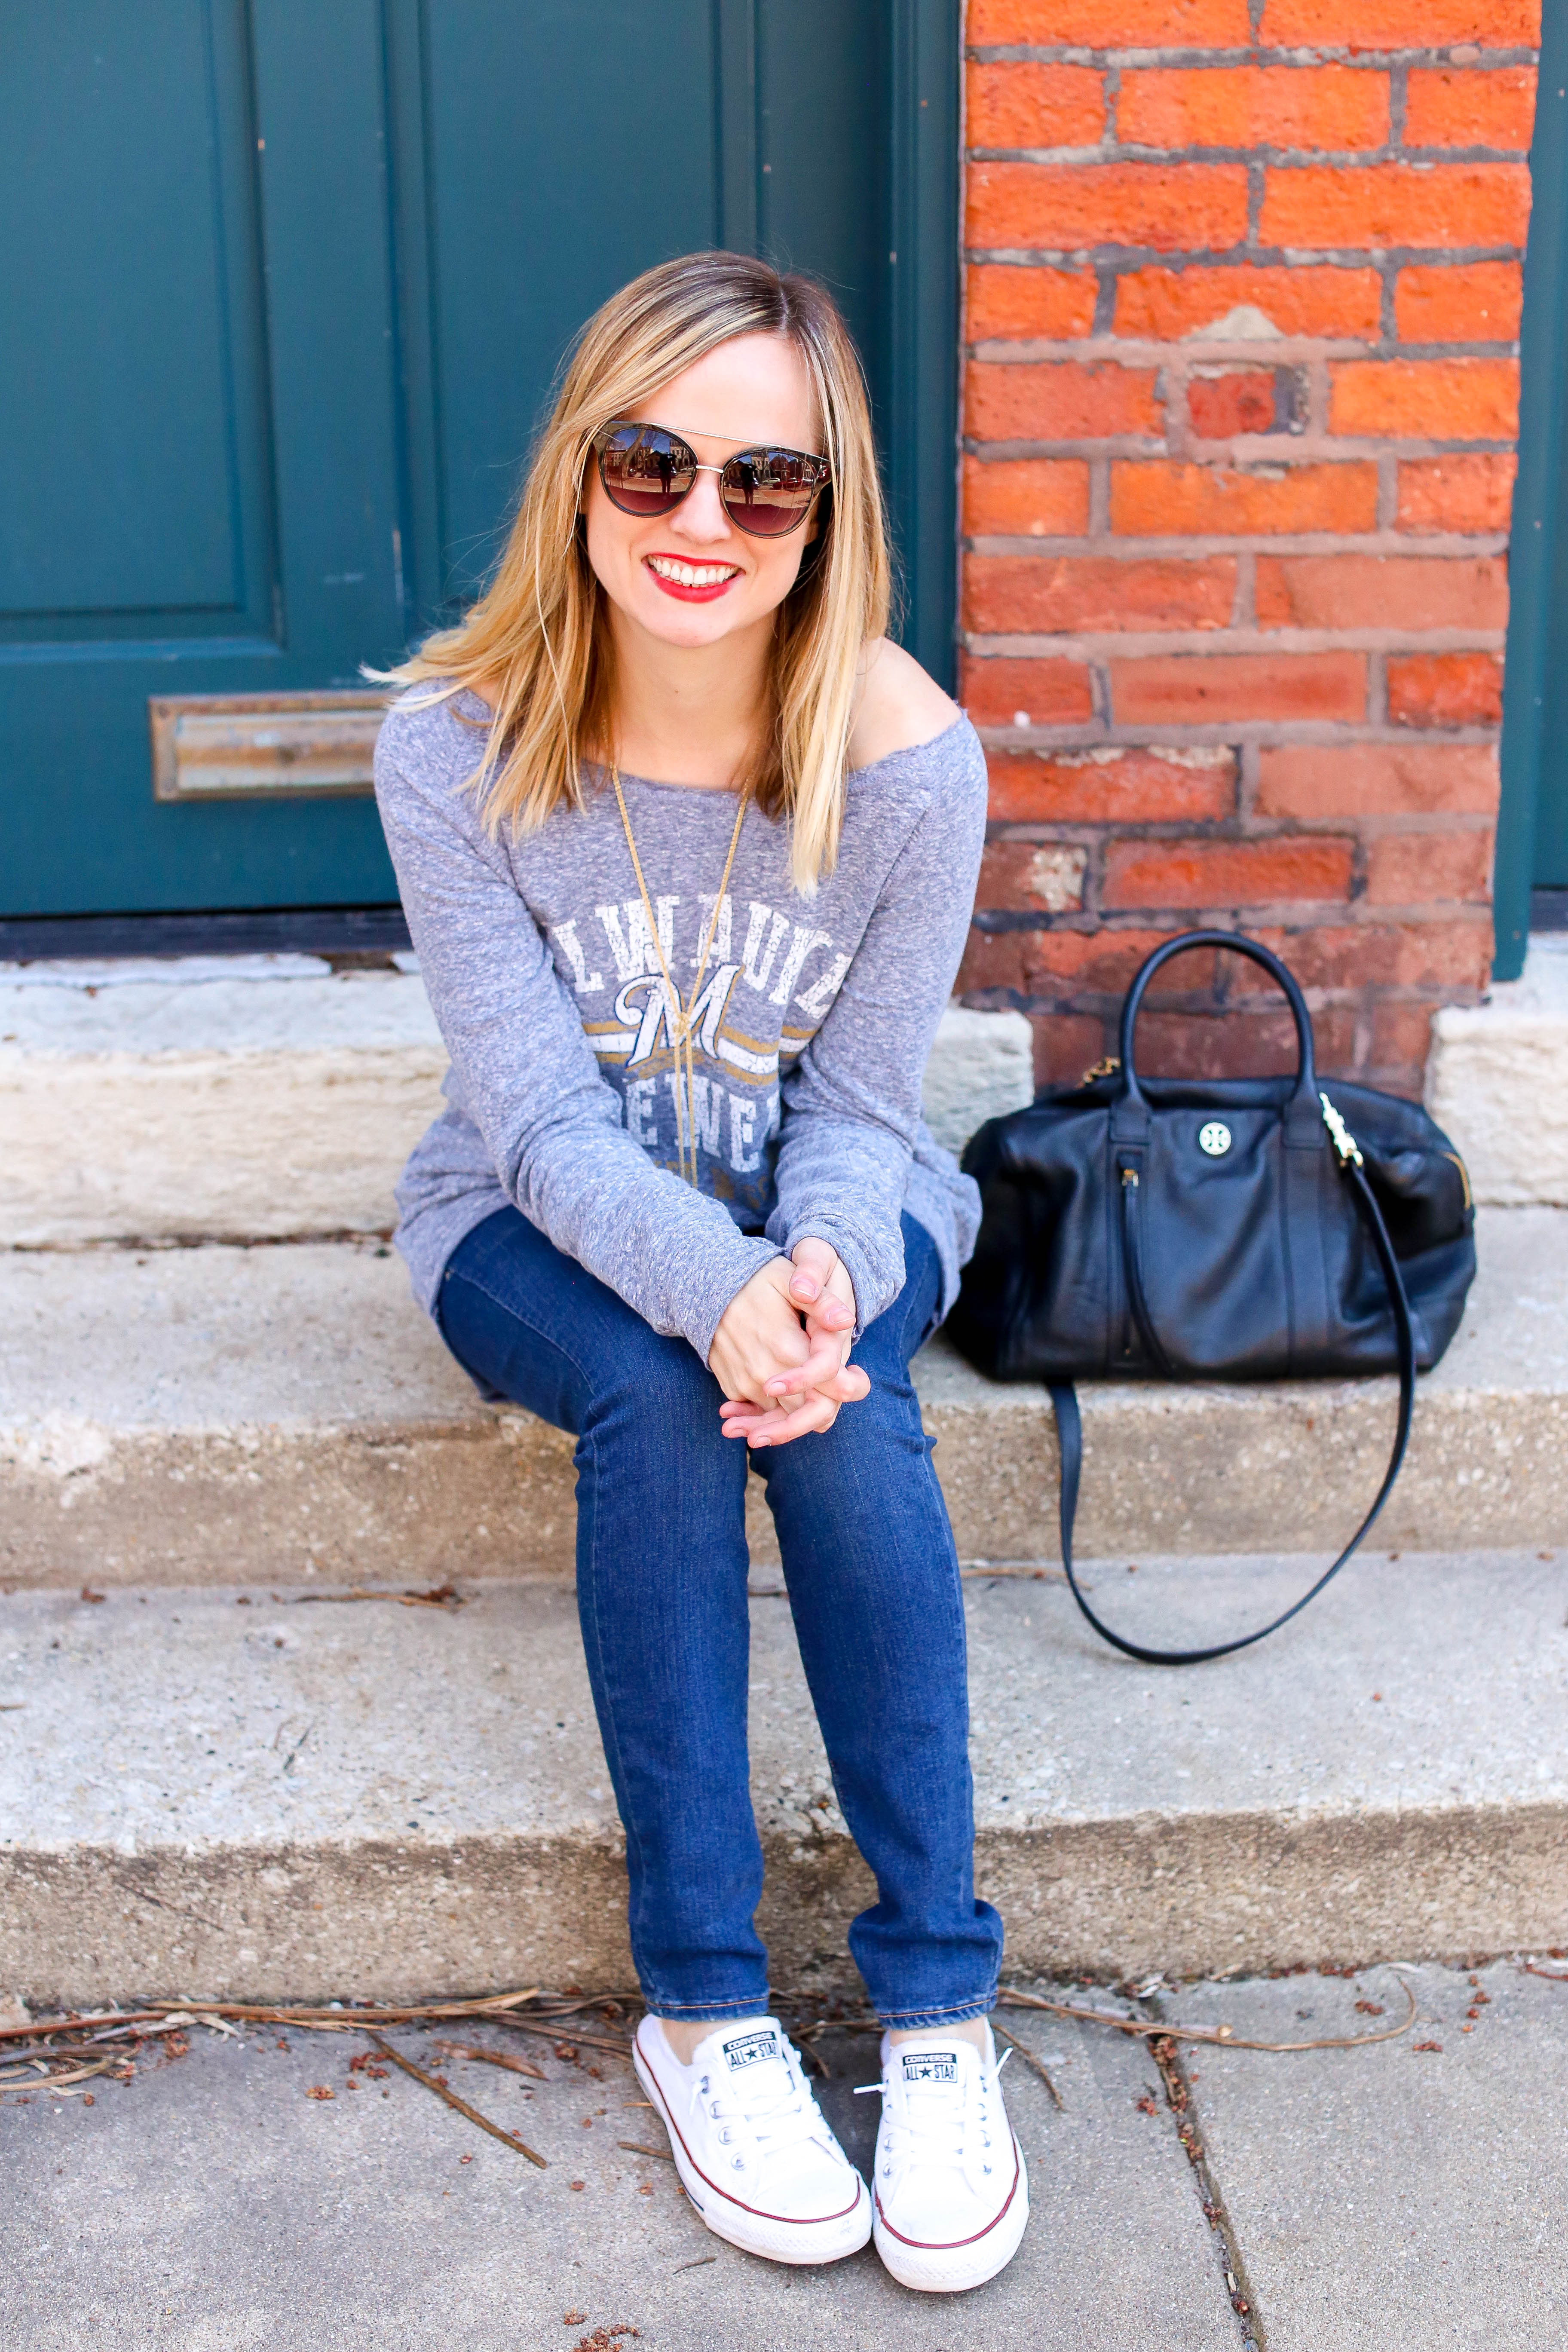 Game Day Style | Charmingly Styled